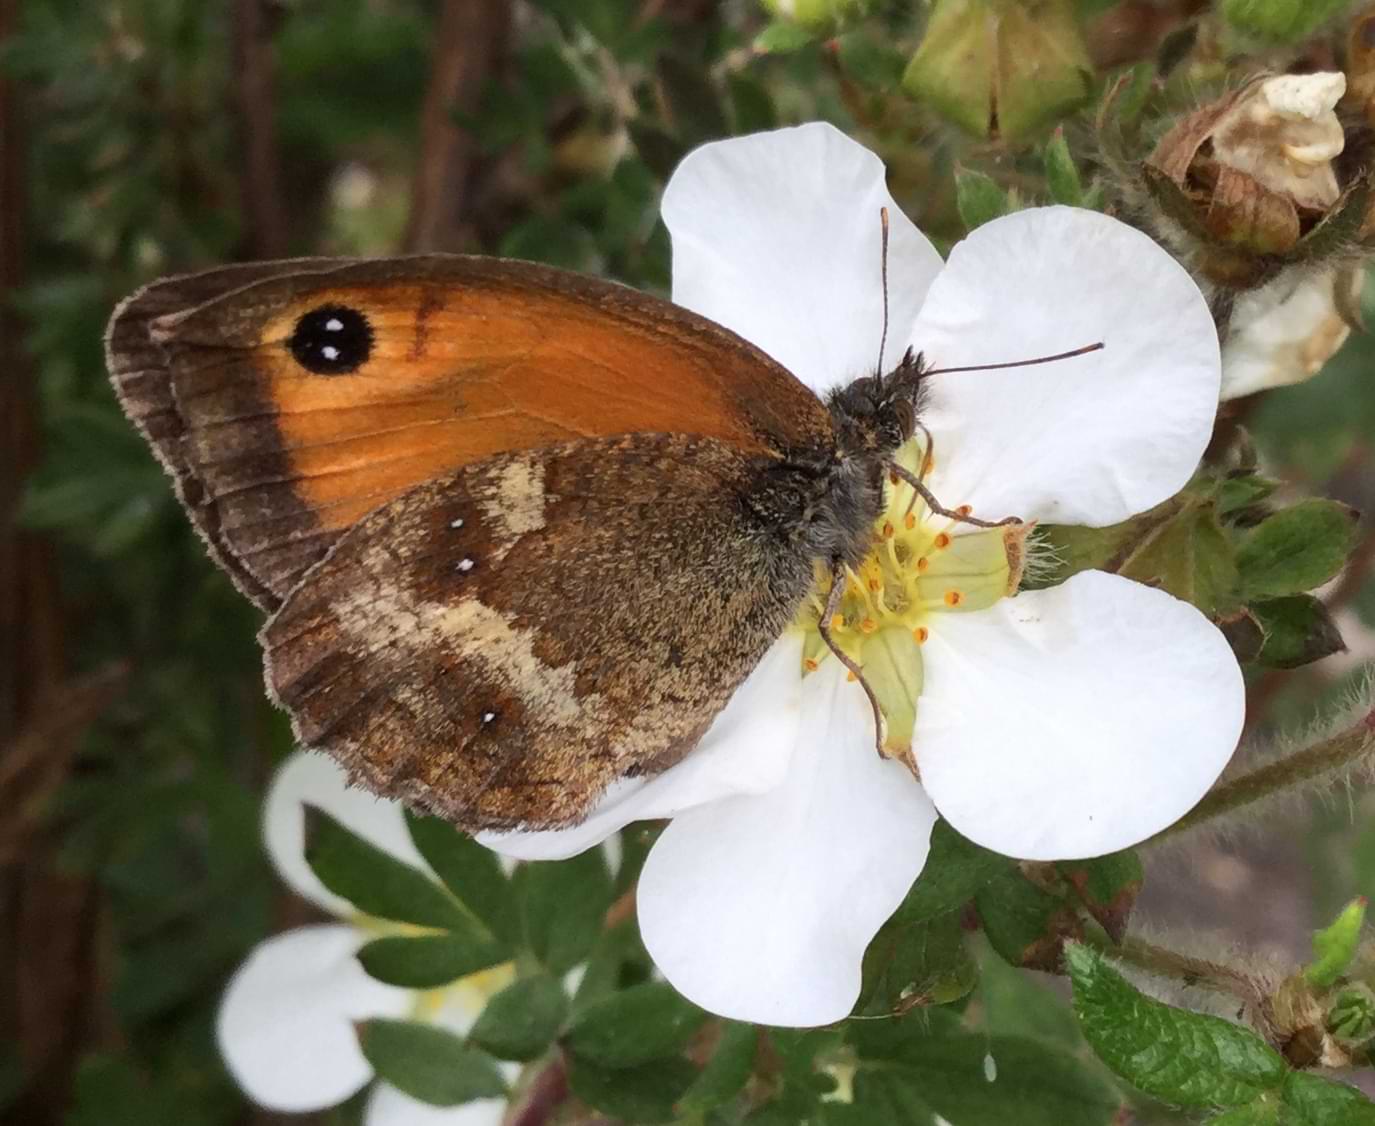 A butterfly resting on a white flower. Its underwings are brown with a few white spots on them, and its forewings are a rich orange colour with one large black eyespot, which has two white dots for pupils.